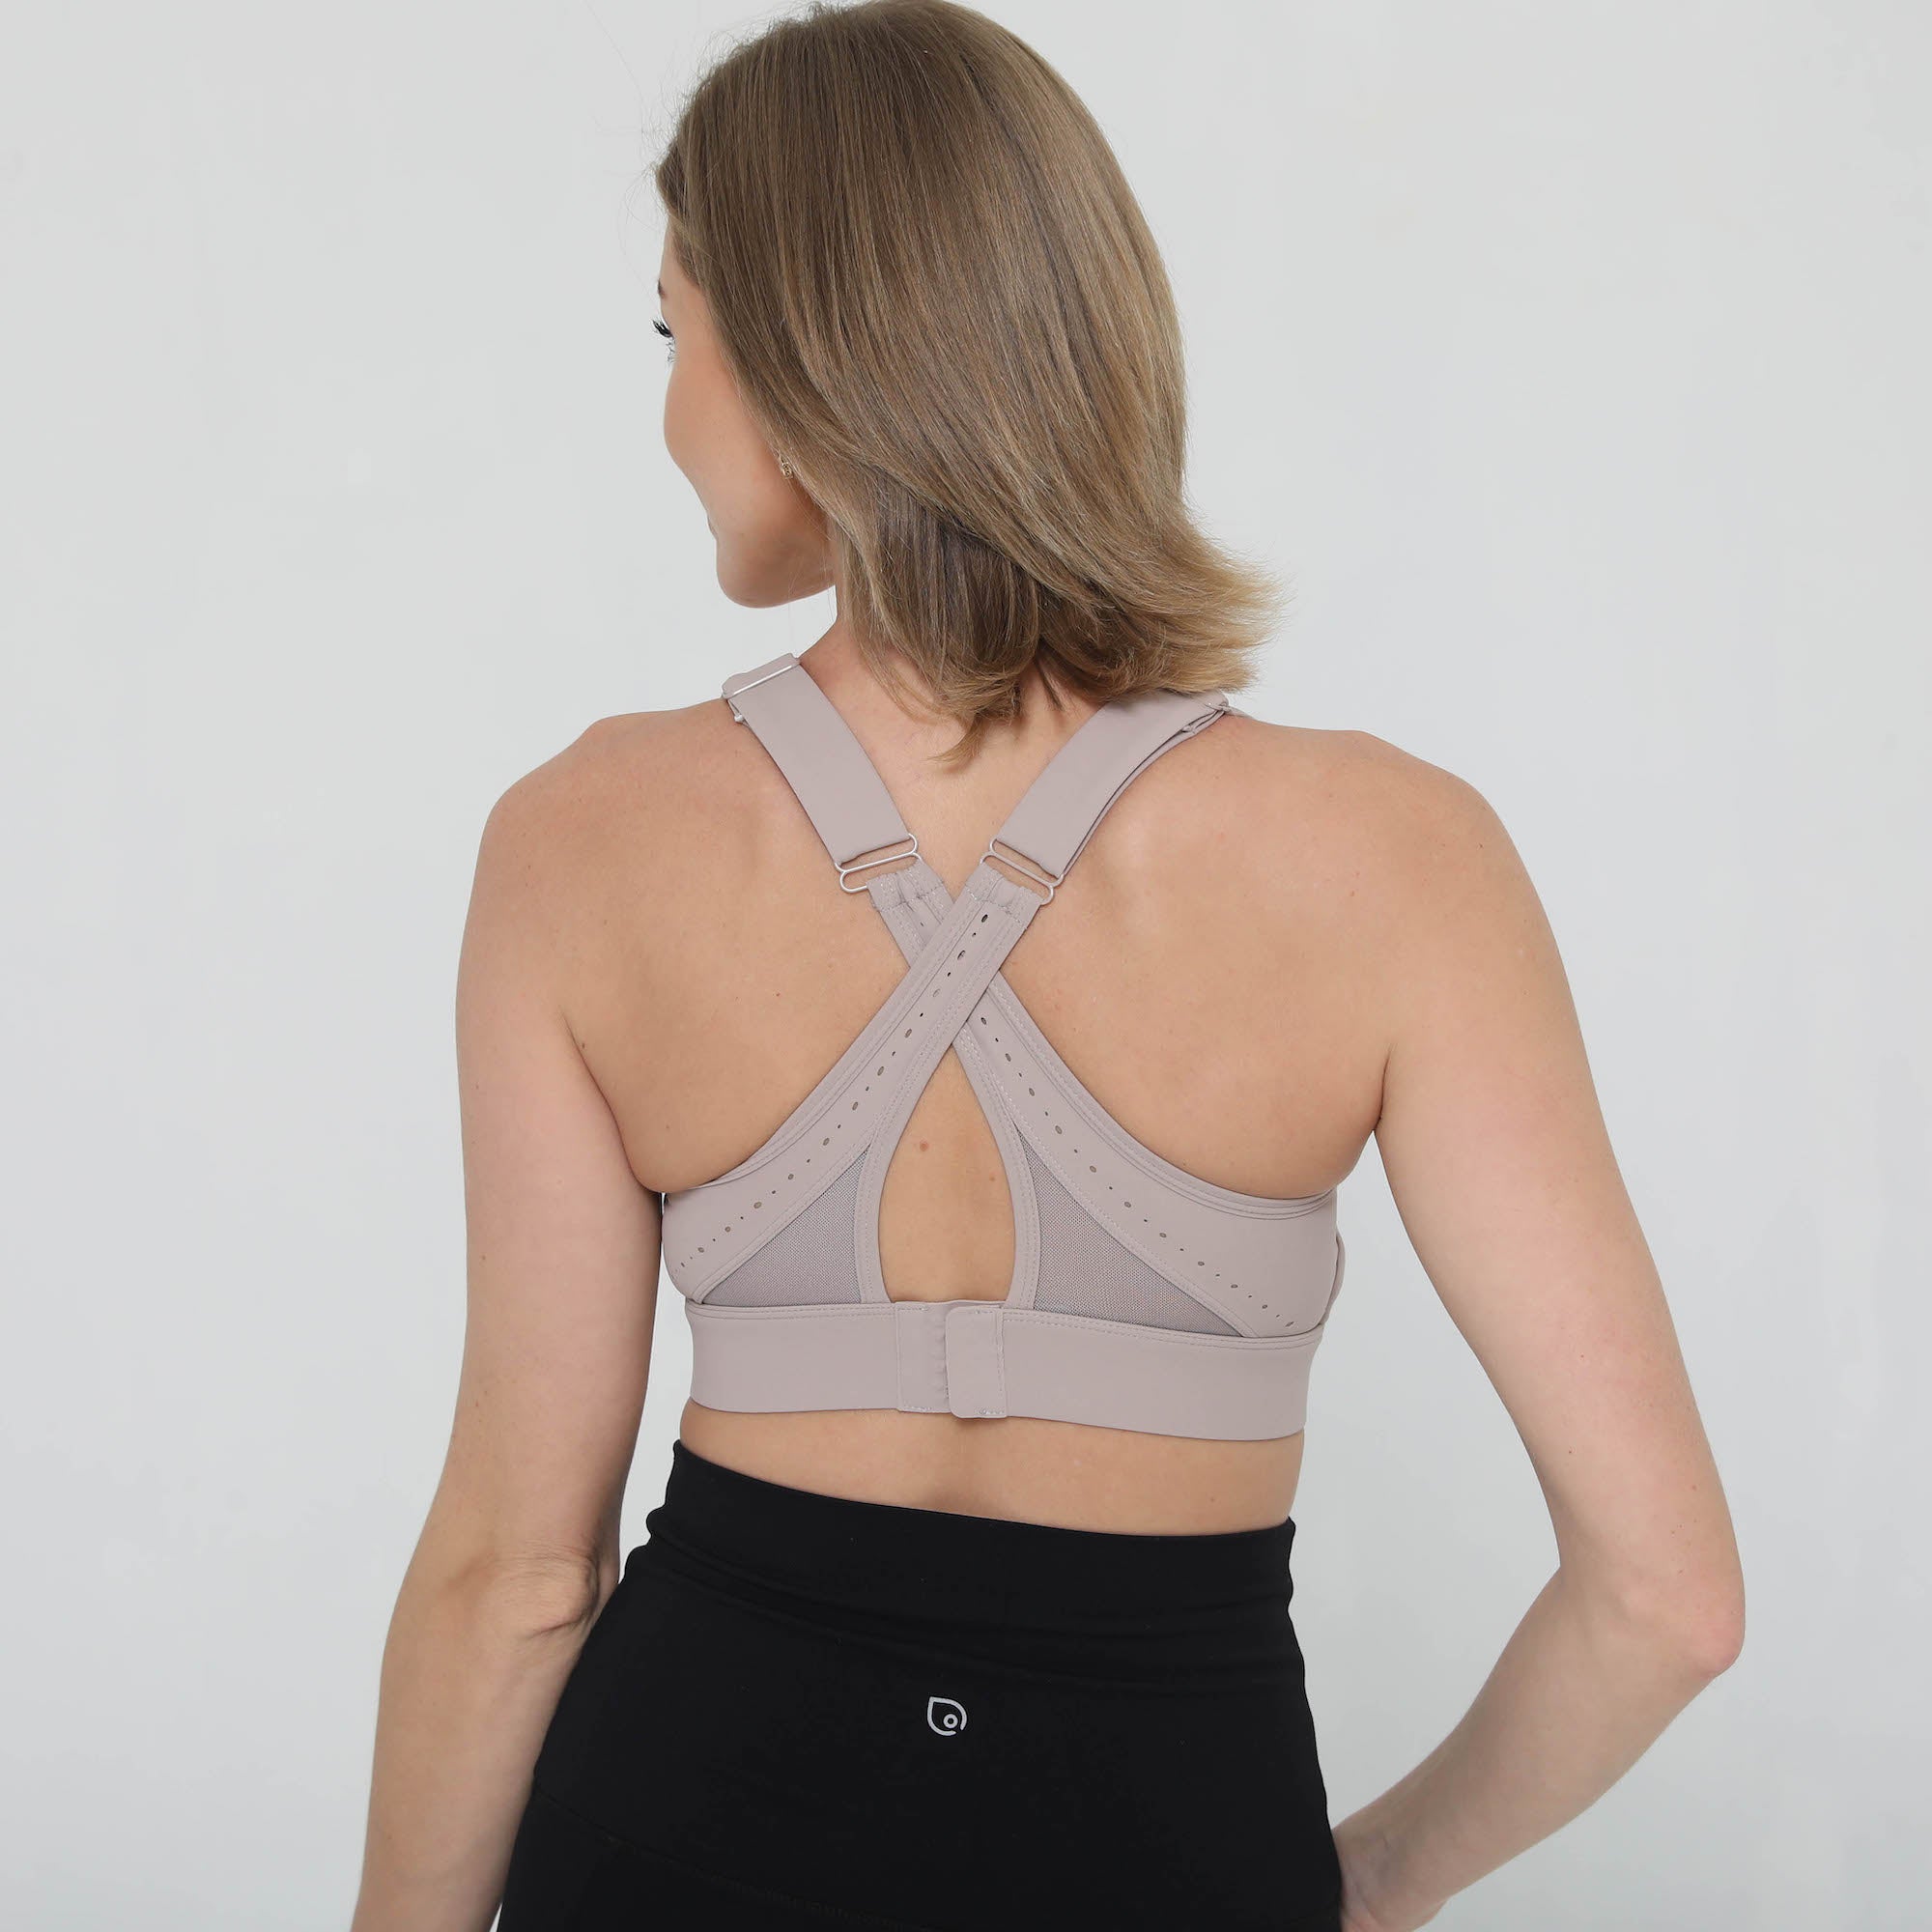 Willow® Introduces the Perfect Pumping Bra to Give Moms Ultimate